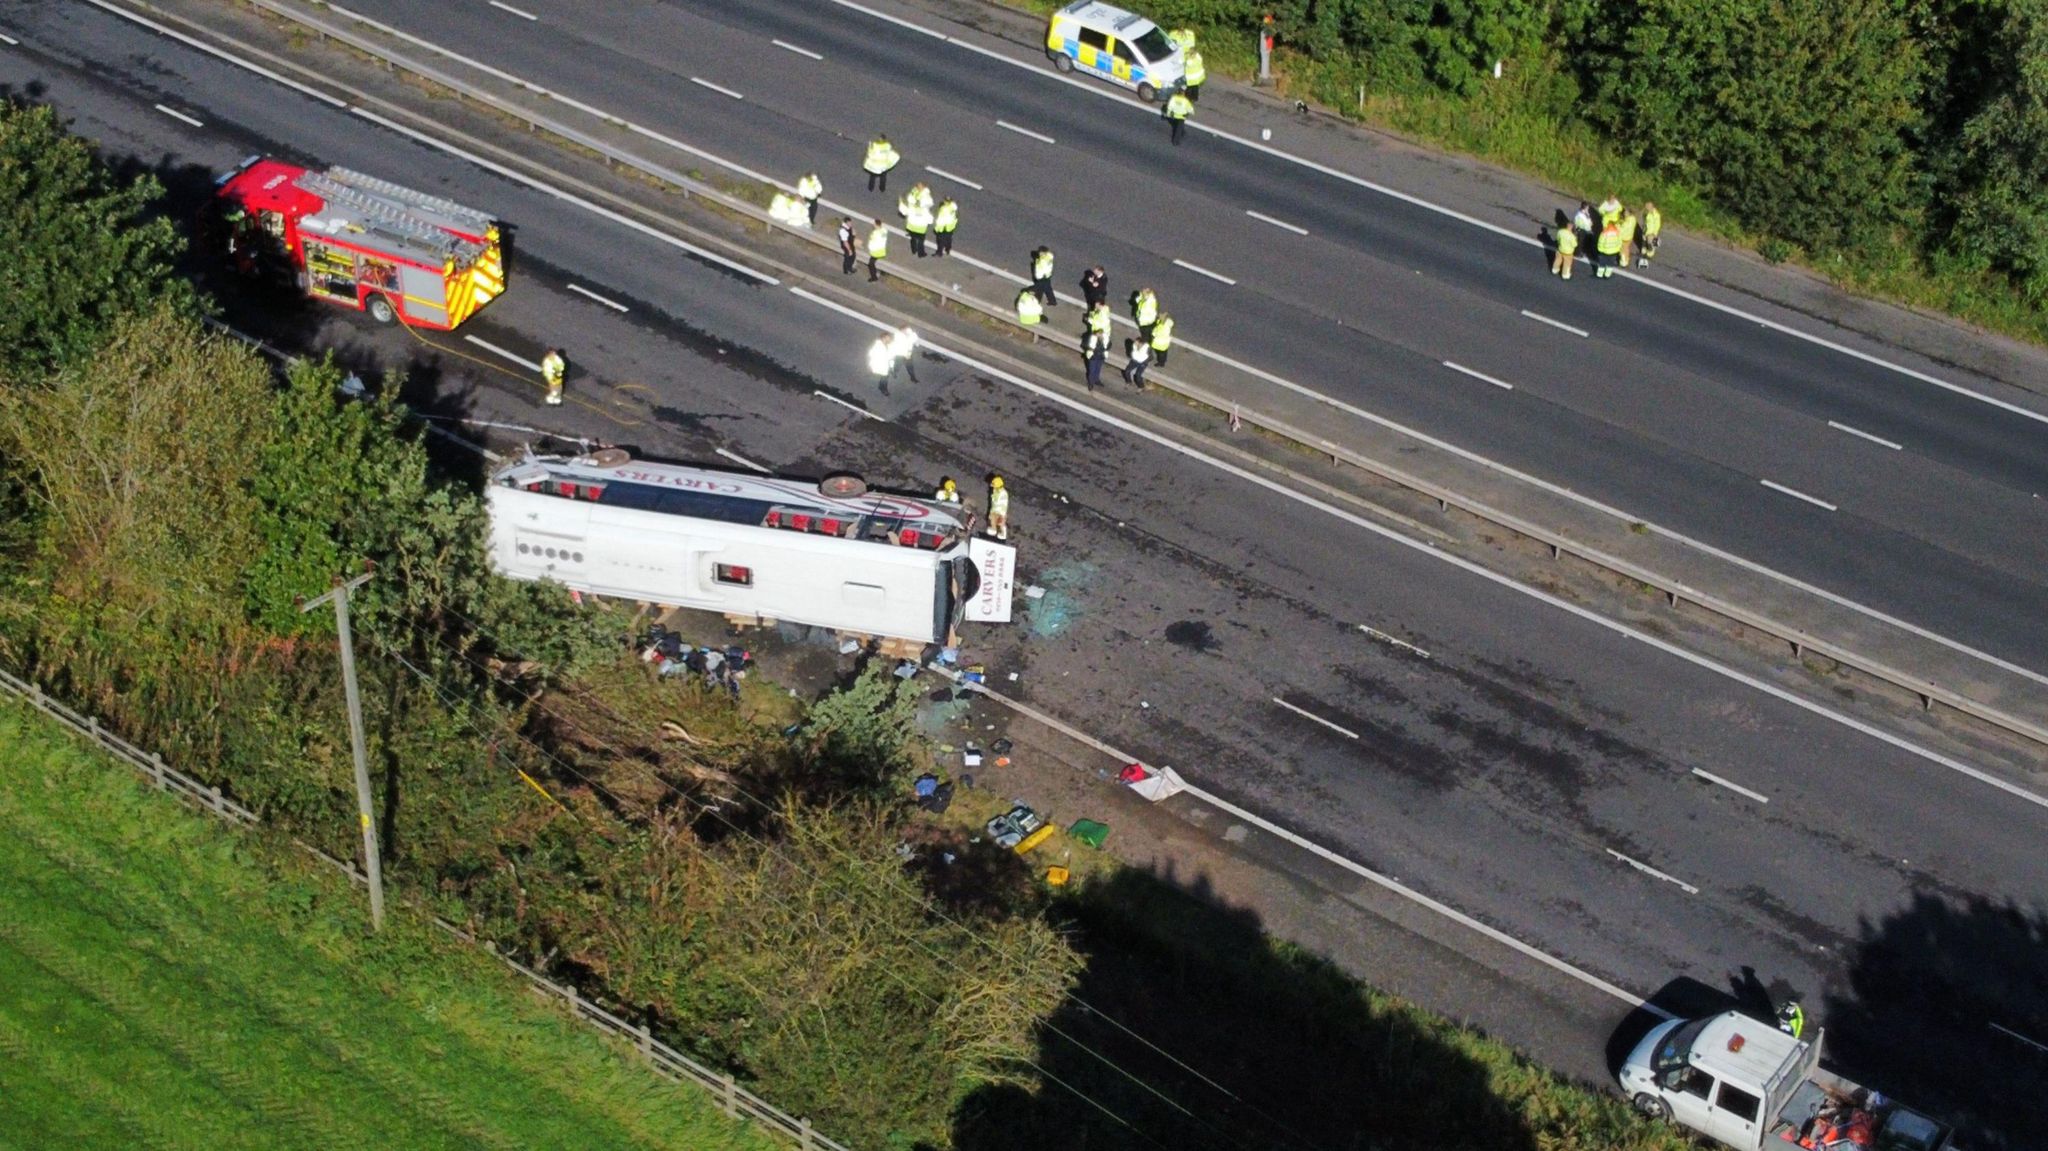 An aerial view of the coach lying on its side with emergency vehicles at the scene